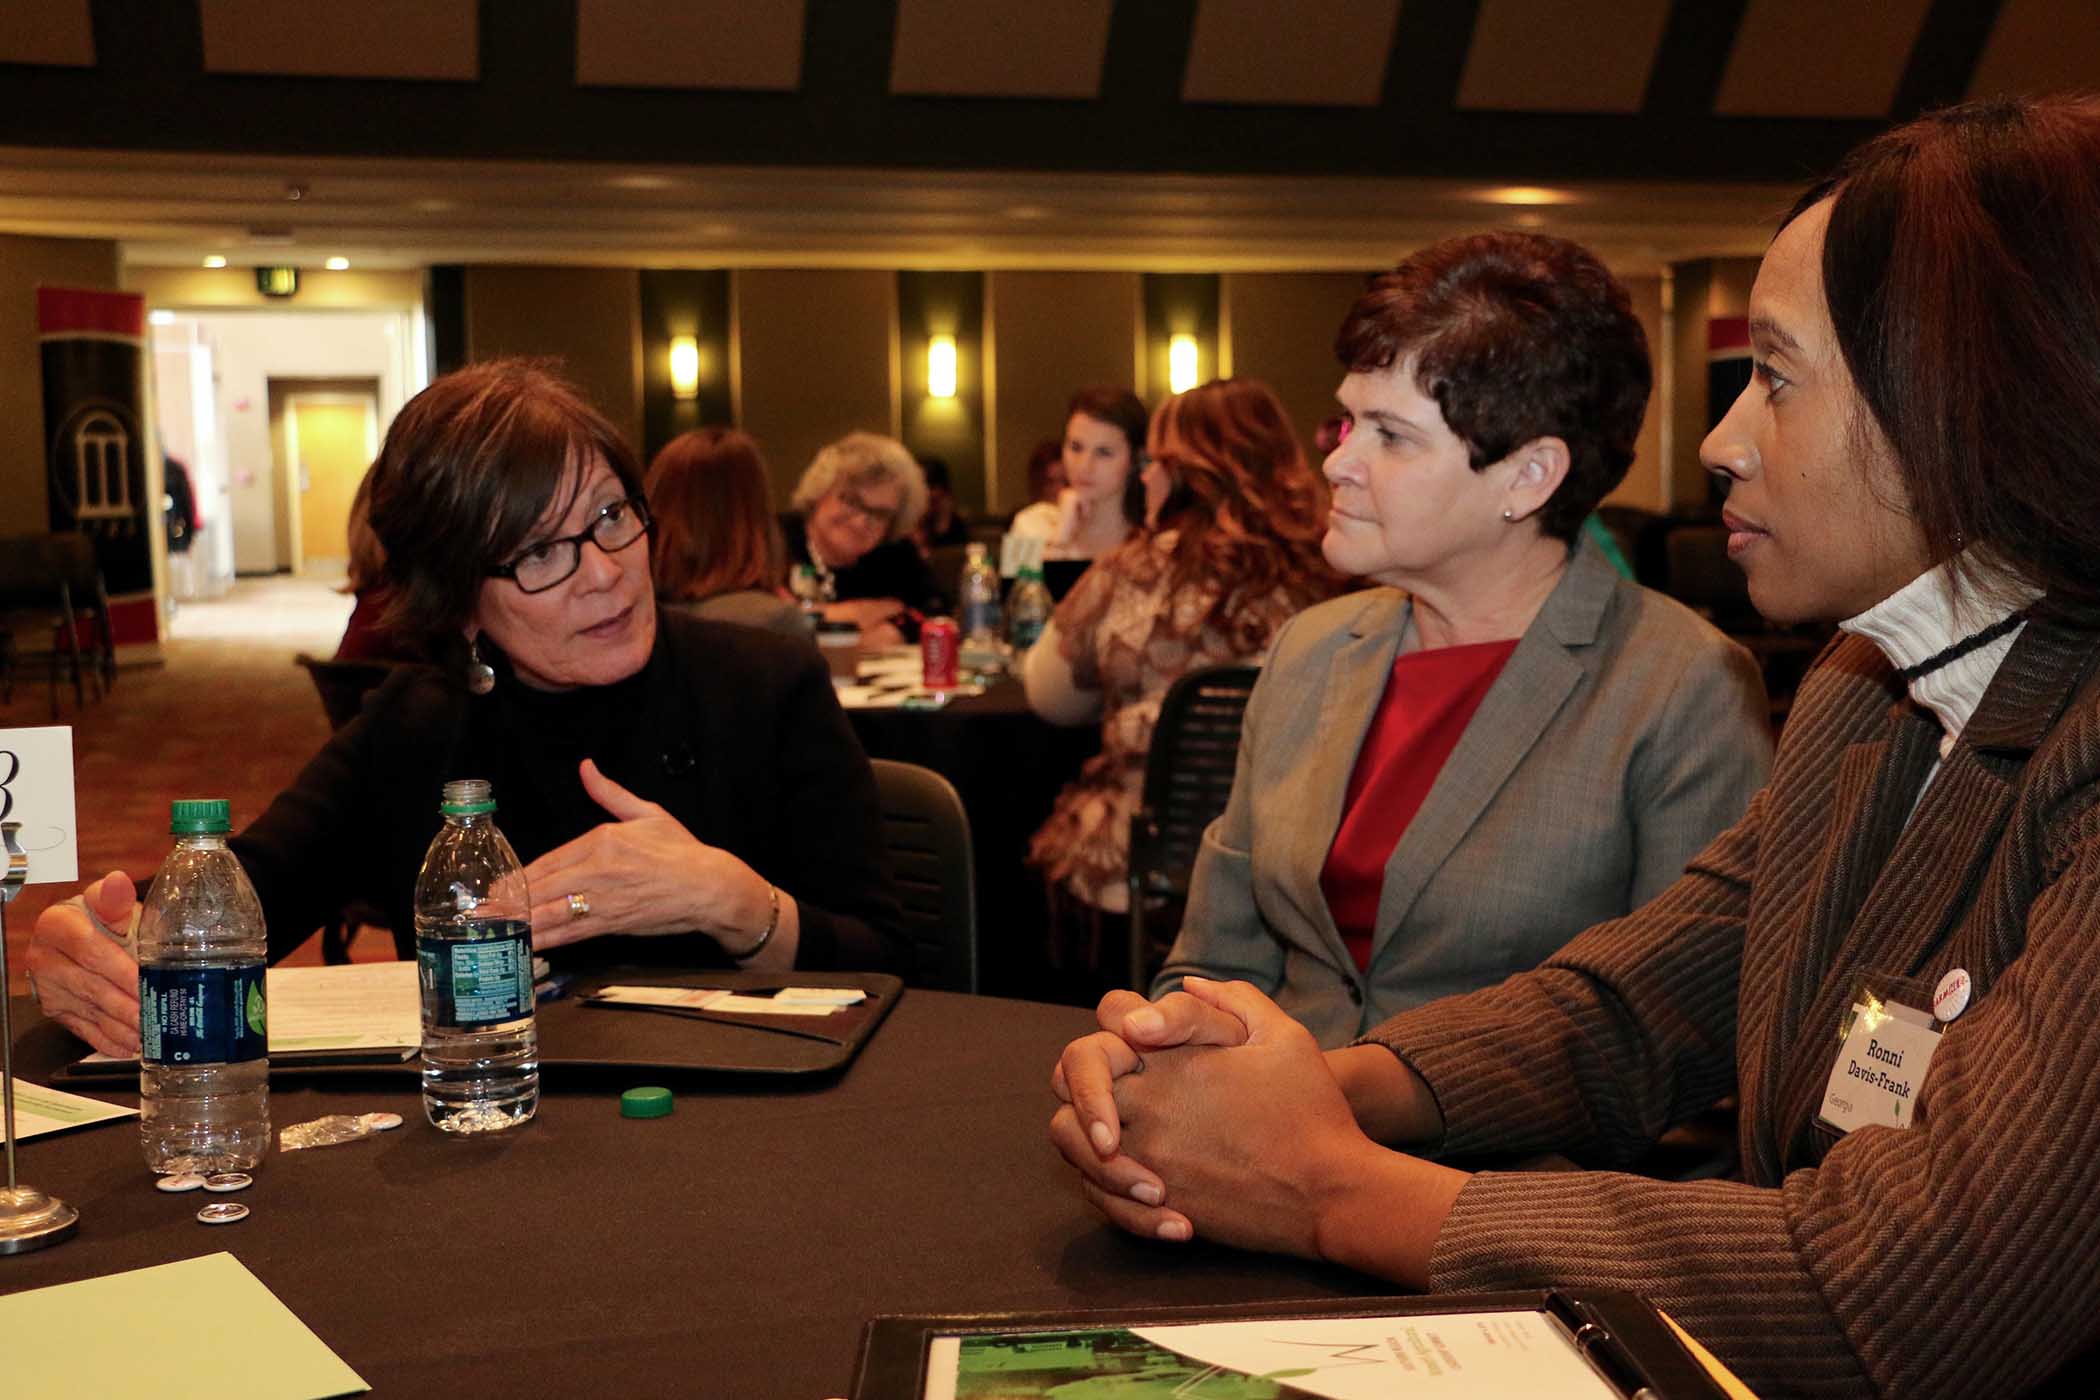 USDA Deputy Secretary Krysta Harden, center, and Georgia delegate Ronni Davis-Frank, right, listen to Maritza Soto Keen, a work session moderator from the UGA J.W. Fanning Institute for Leadership Development, at the Southern Region Women's Agricultural Leadership Summit on Feb. 8.